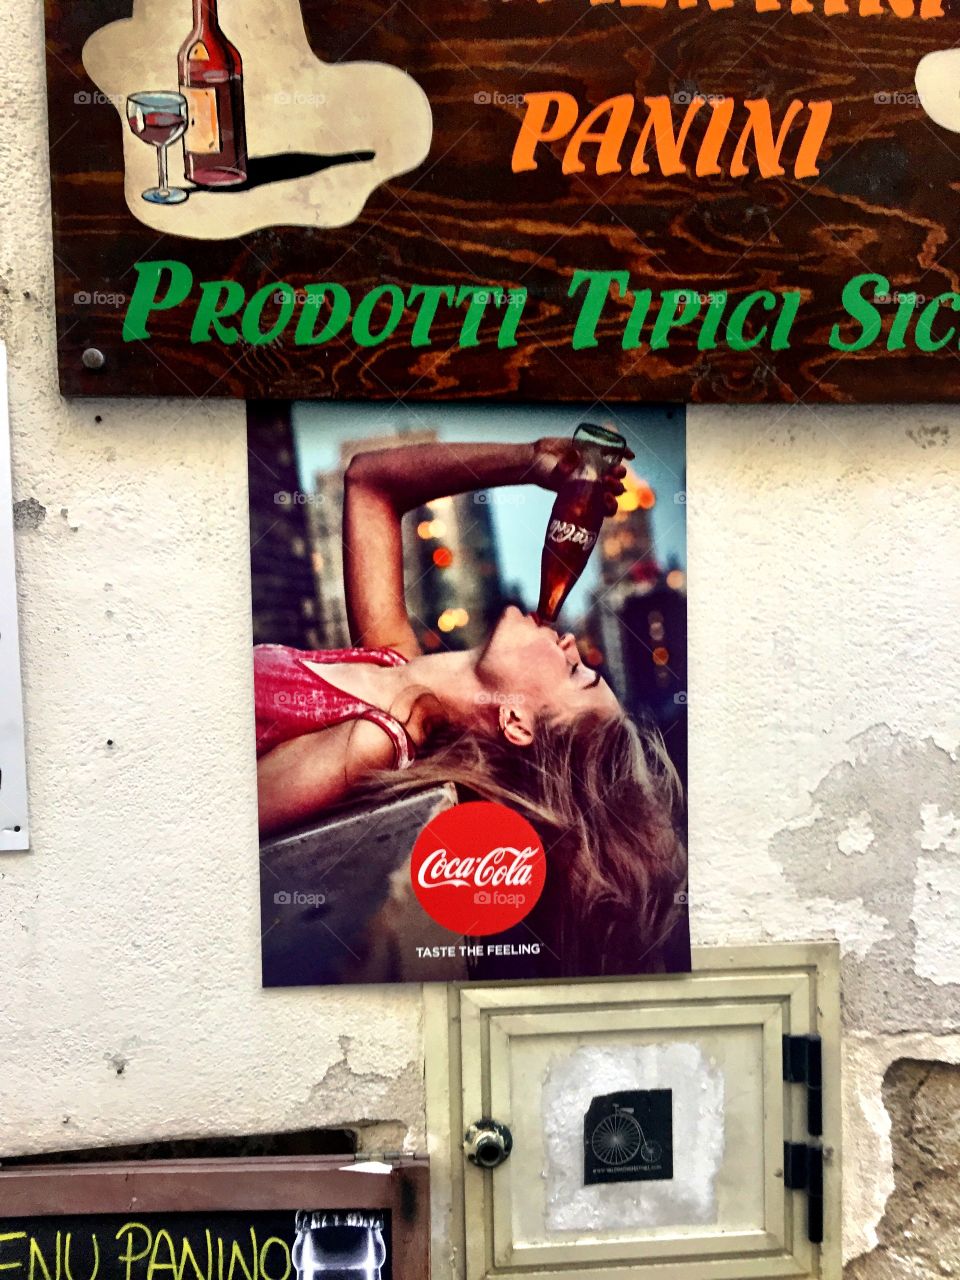 An old poster of coke